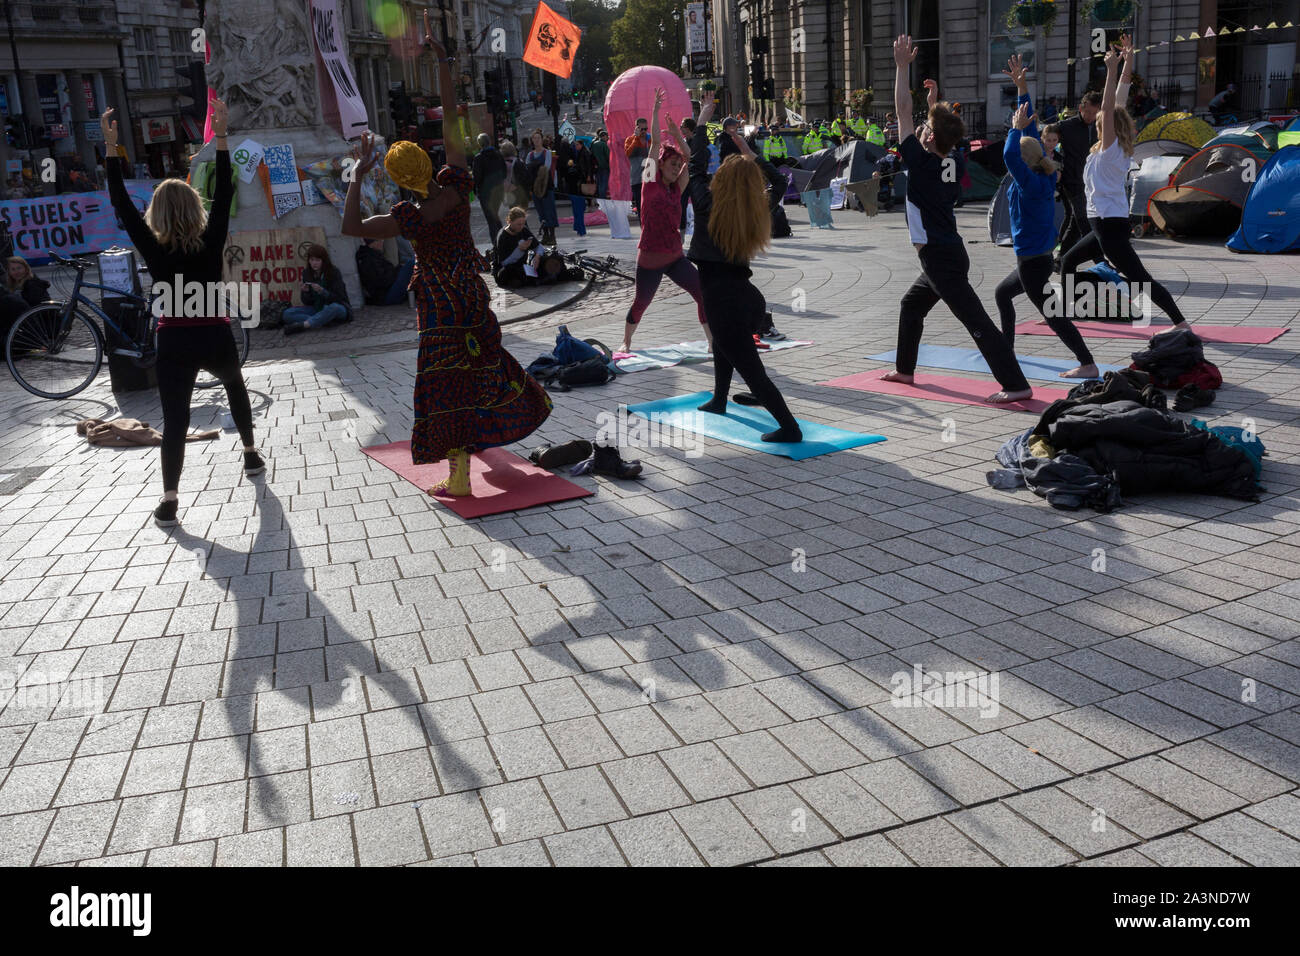 Environmental activists practice yoga while protesting about Climate Change during an occupation of Trafalgar Square in central London, the third day of a two-week prolonged worldwide protest by members of Extinction Rebellion, on 9th October 2019, in London, England. Stock Photo